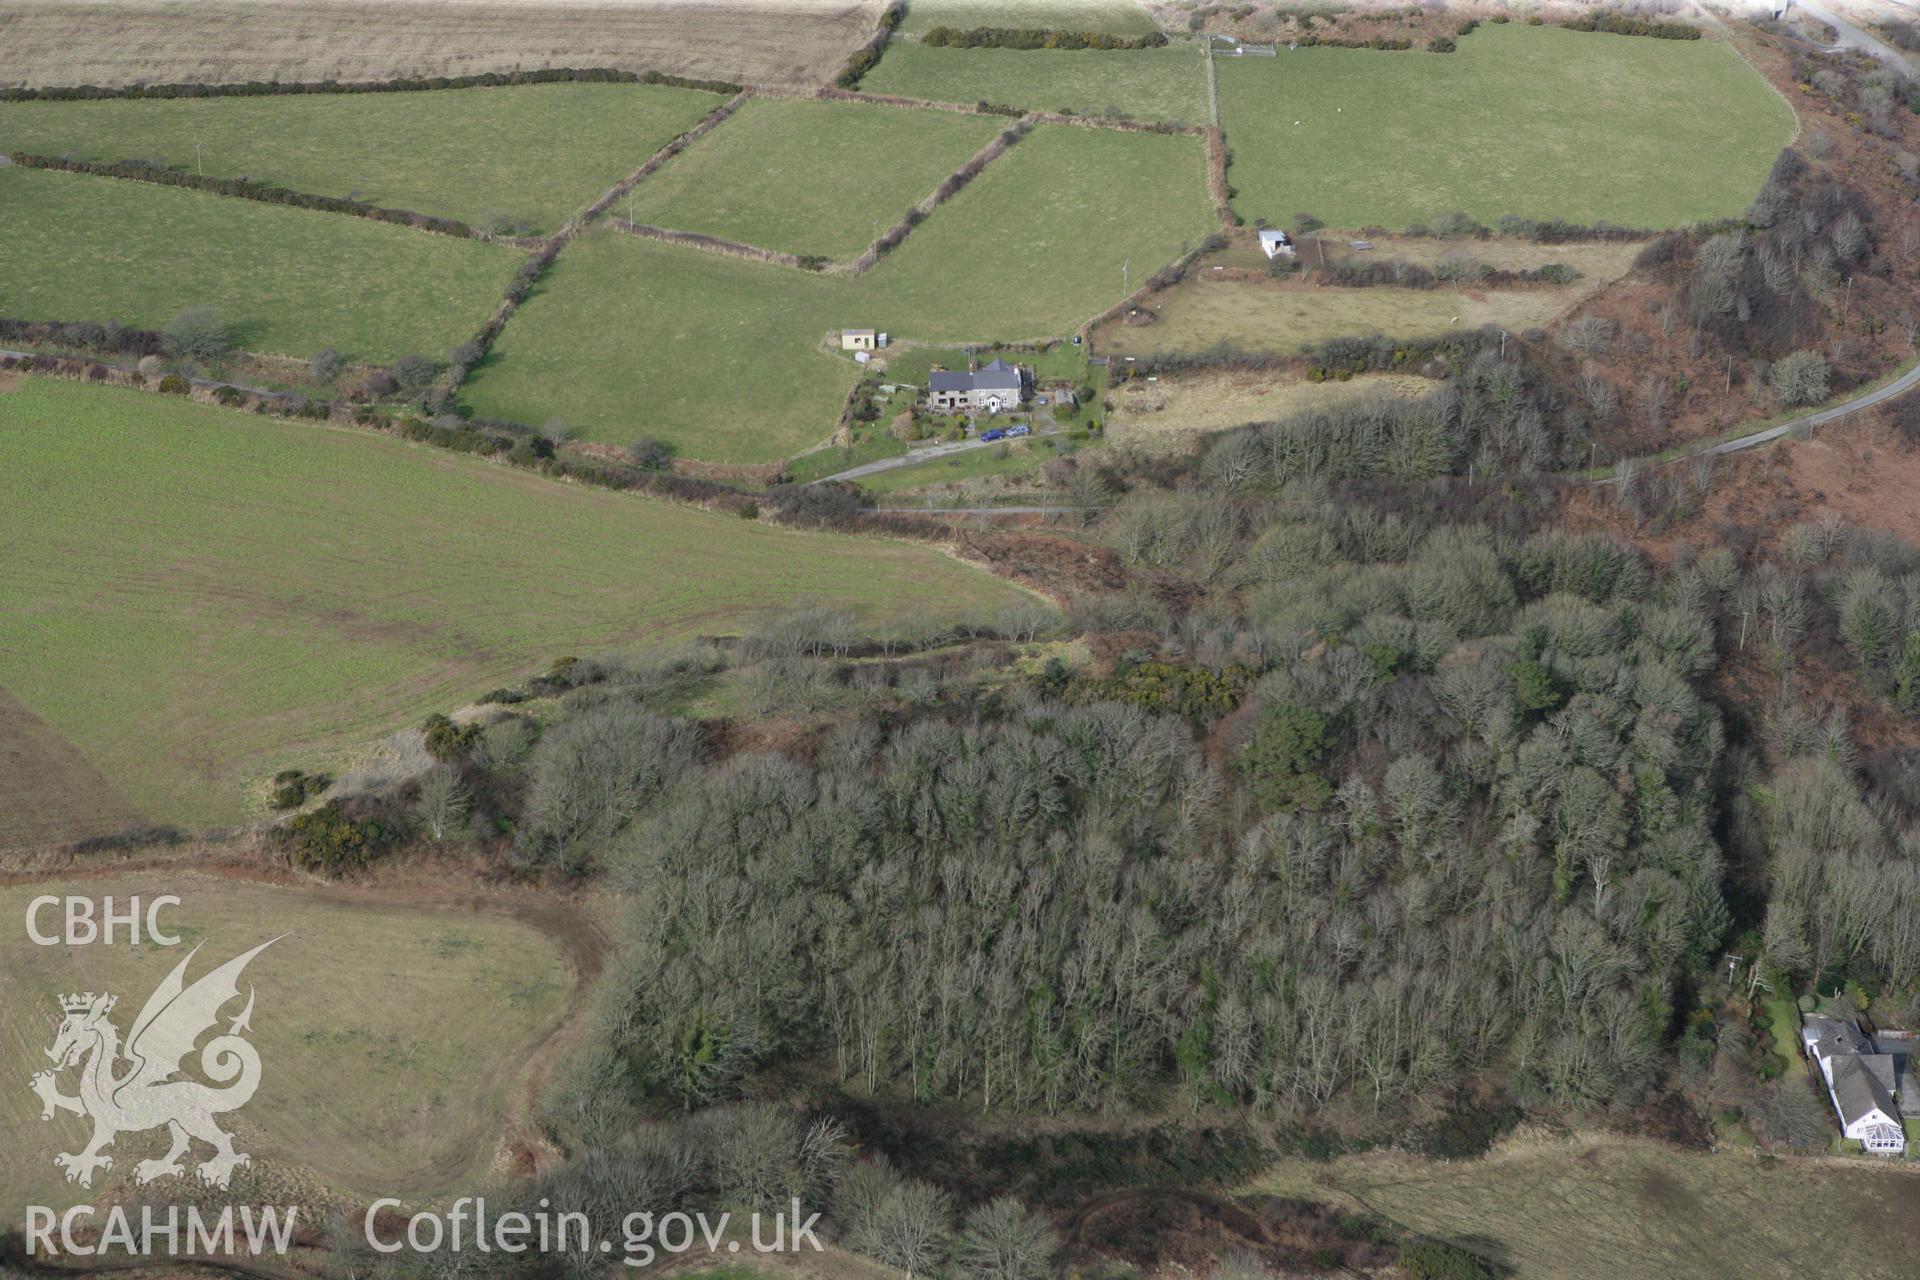 RCAHMW colour oblique aerial photograph of the defended enclosure at Y-Castell, Henre Ruffydd. Taken on 02 March 2010 by Toby Driver